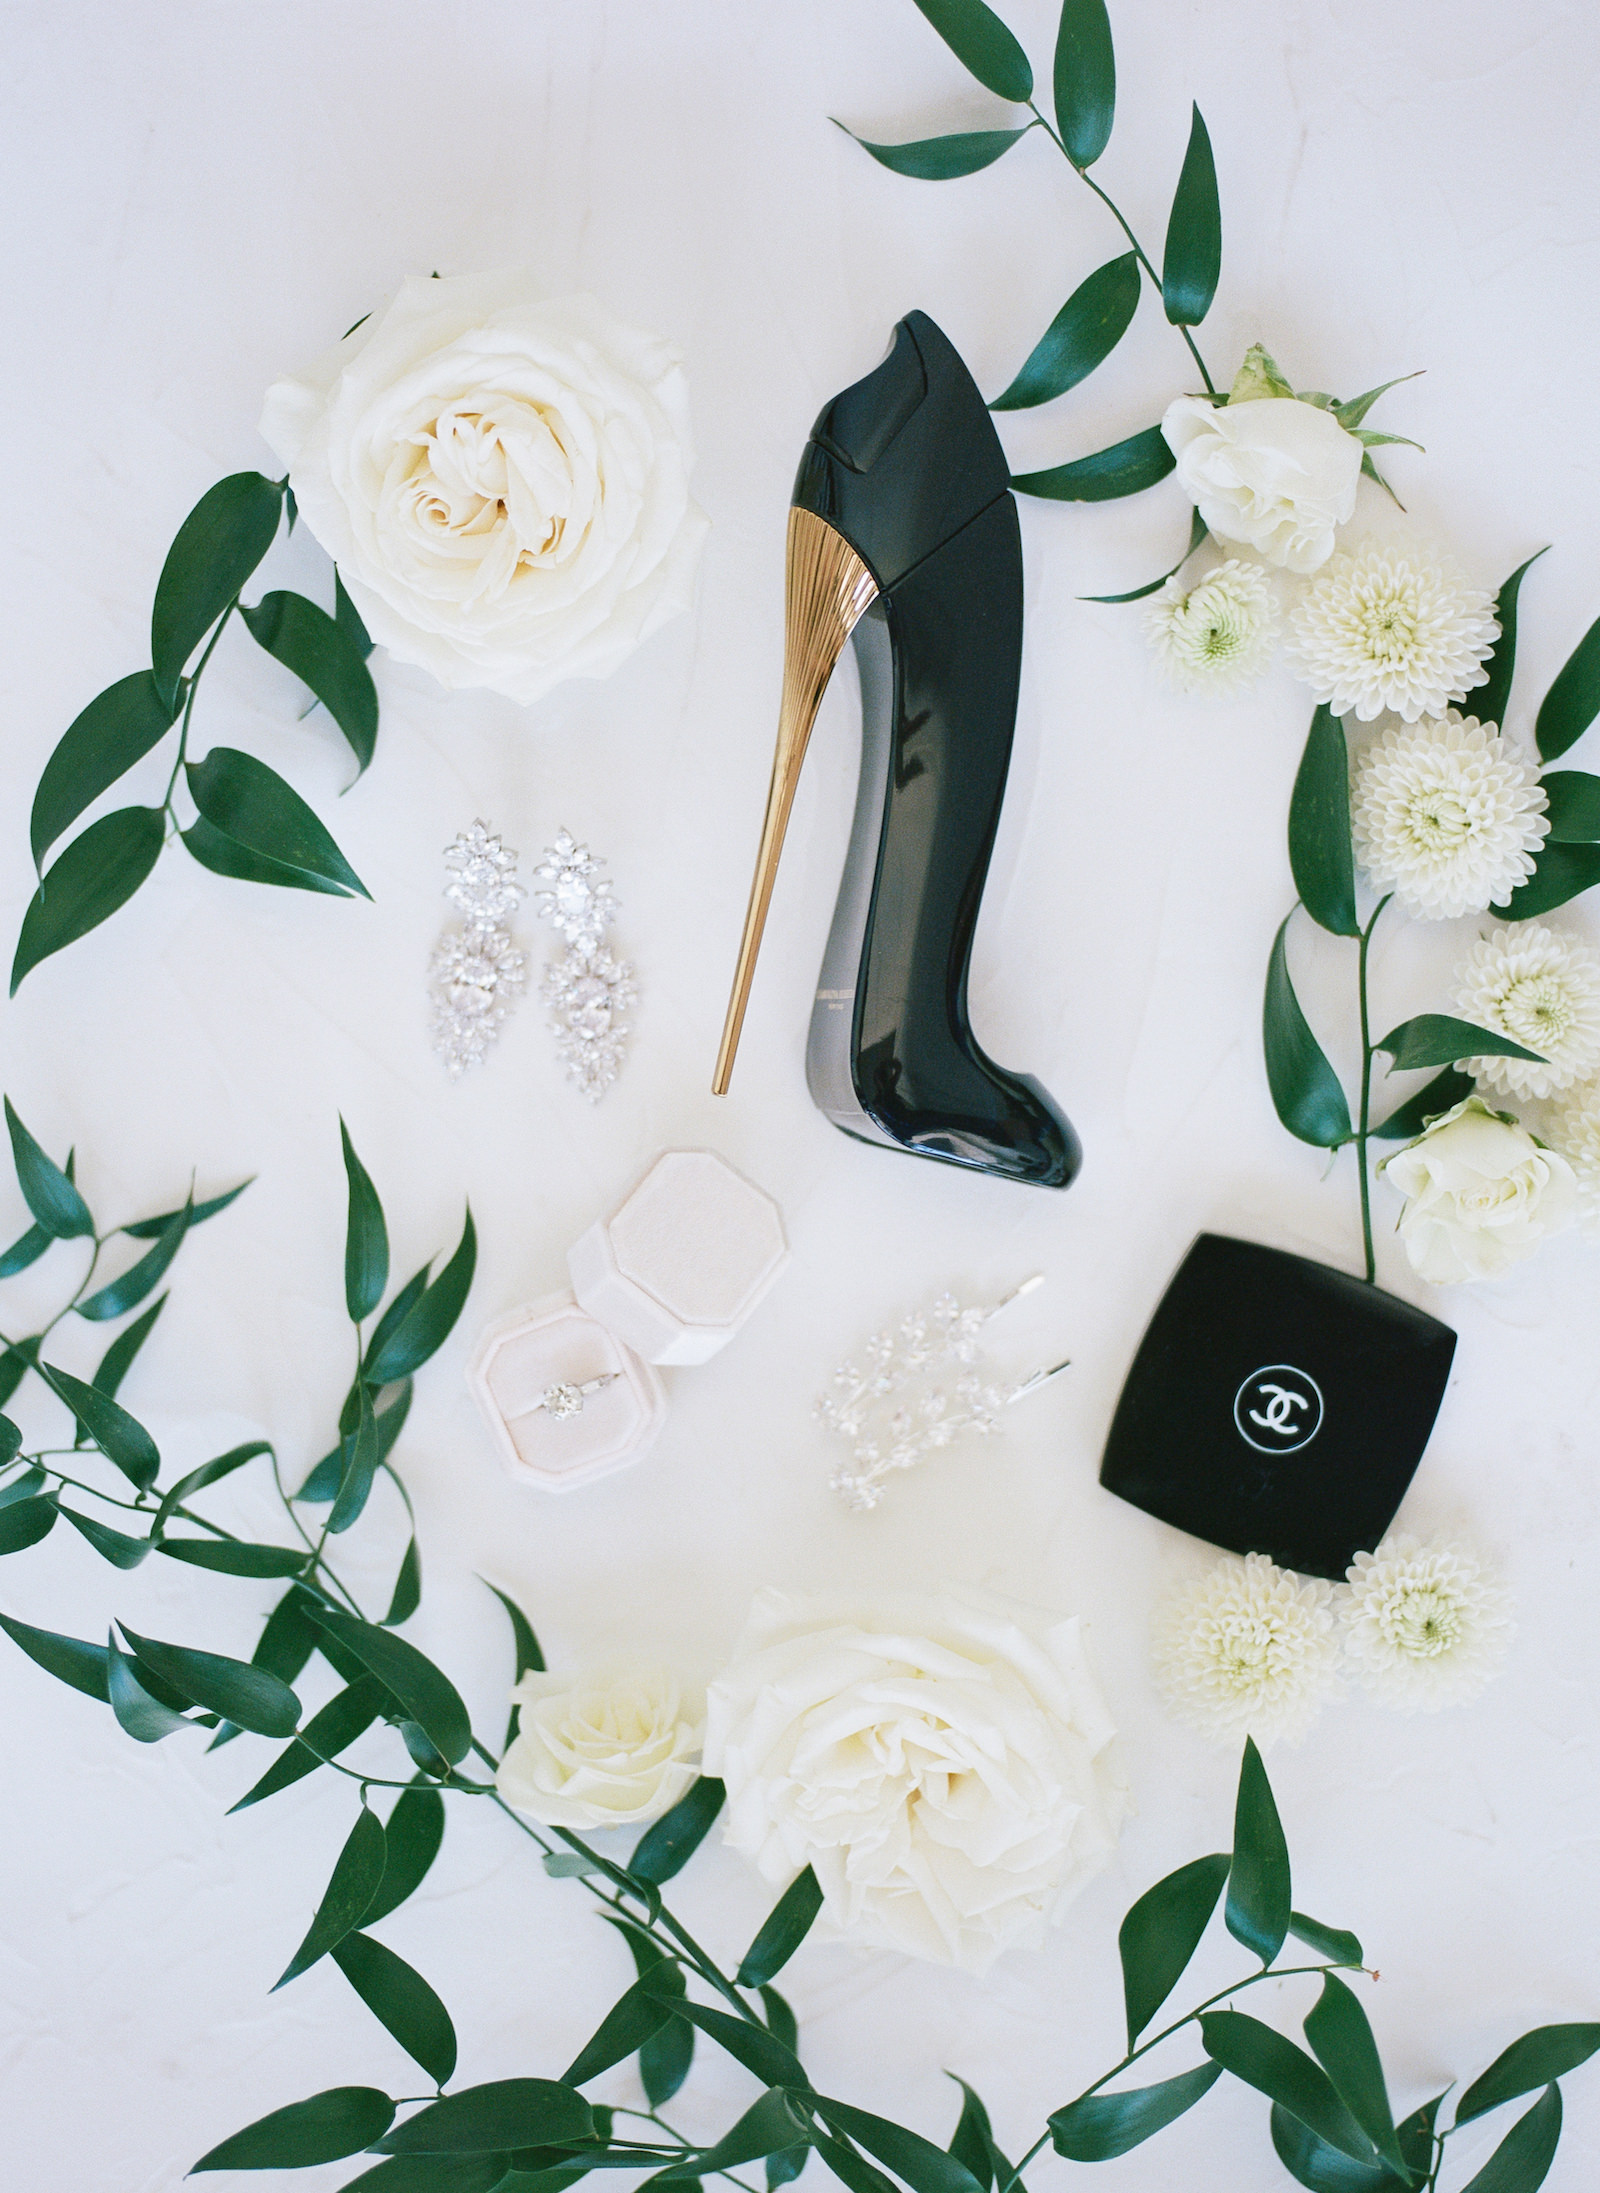 Luxurious Formal Black and White Wedding Accessories, Black Stiletto Heel Perfume Bottle, Chanel Makeup Compact, Engagement Ring, Bridal Jewelry